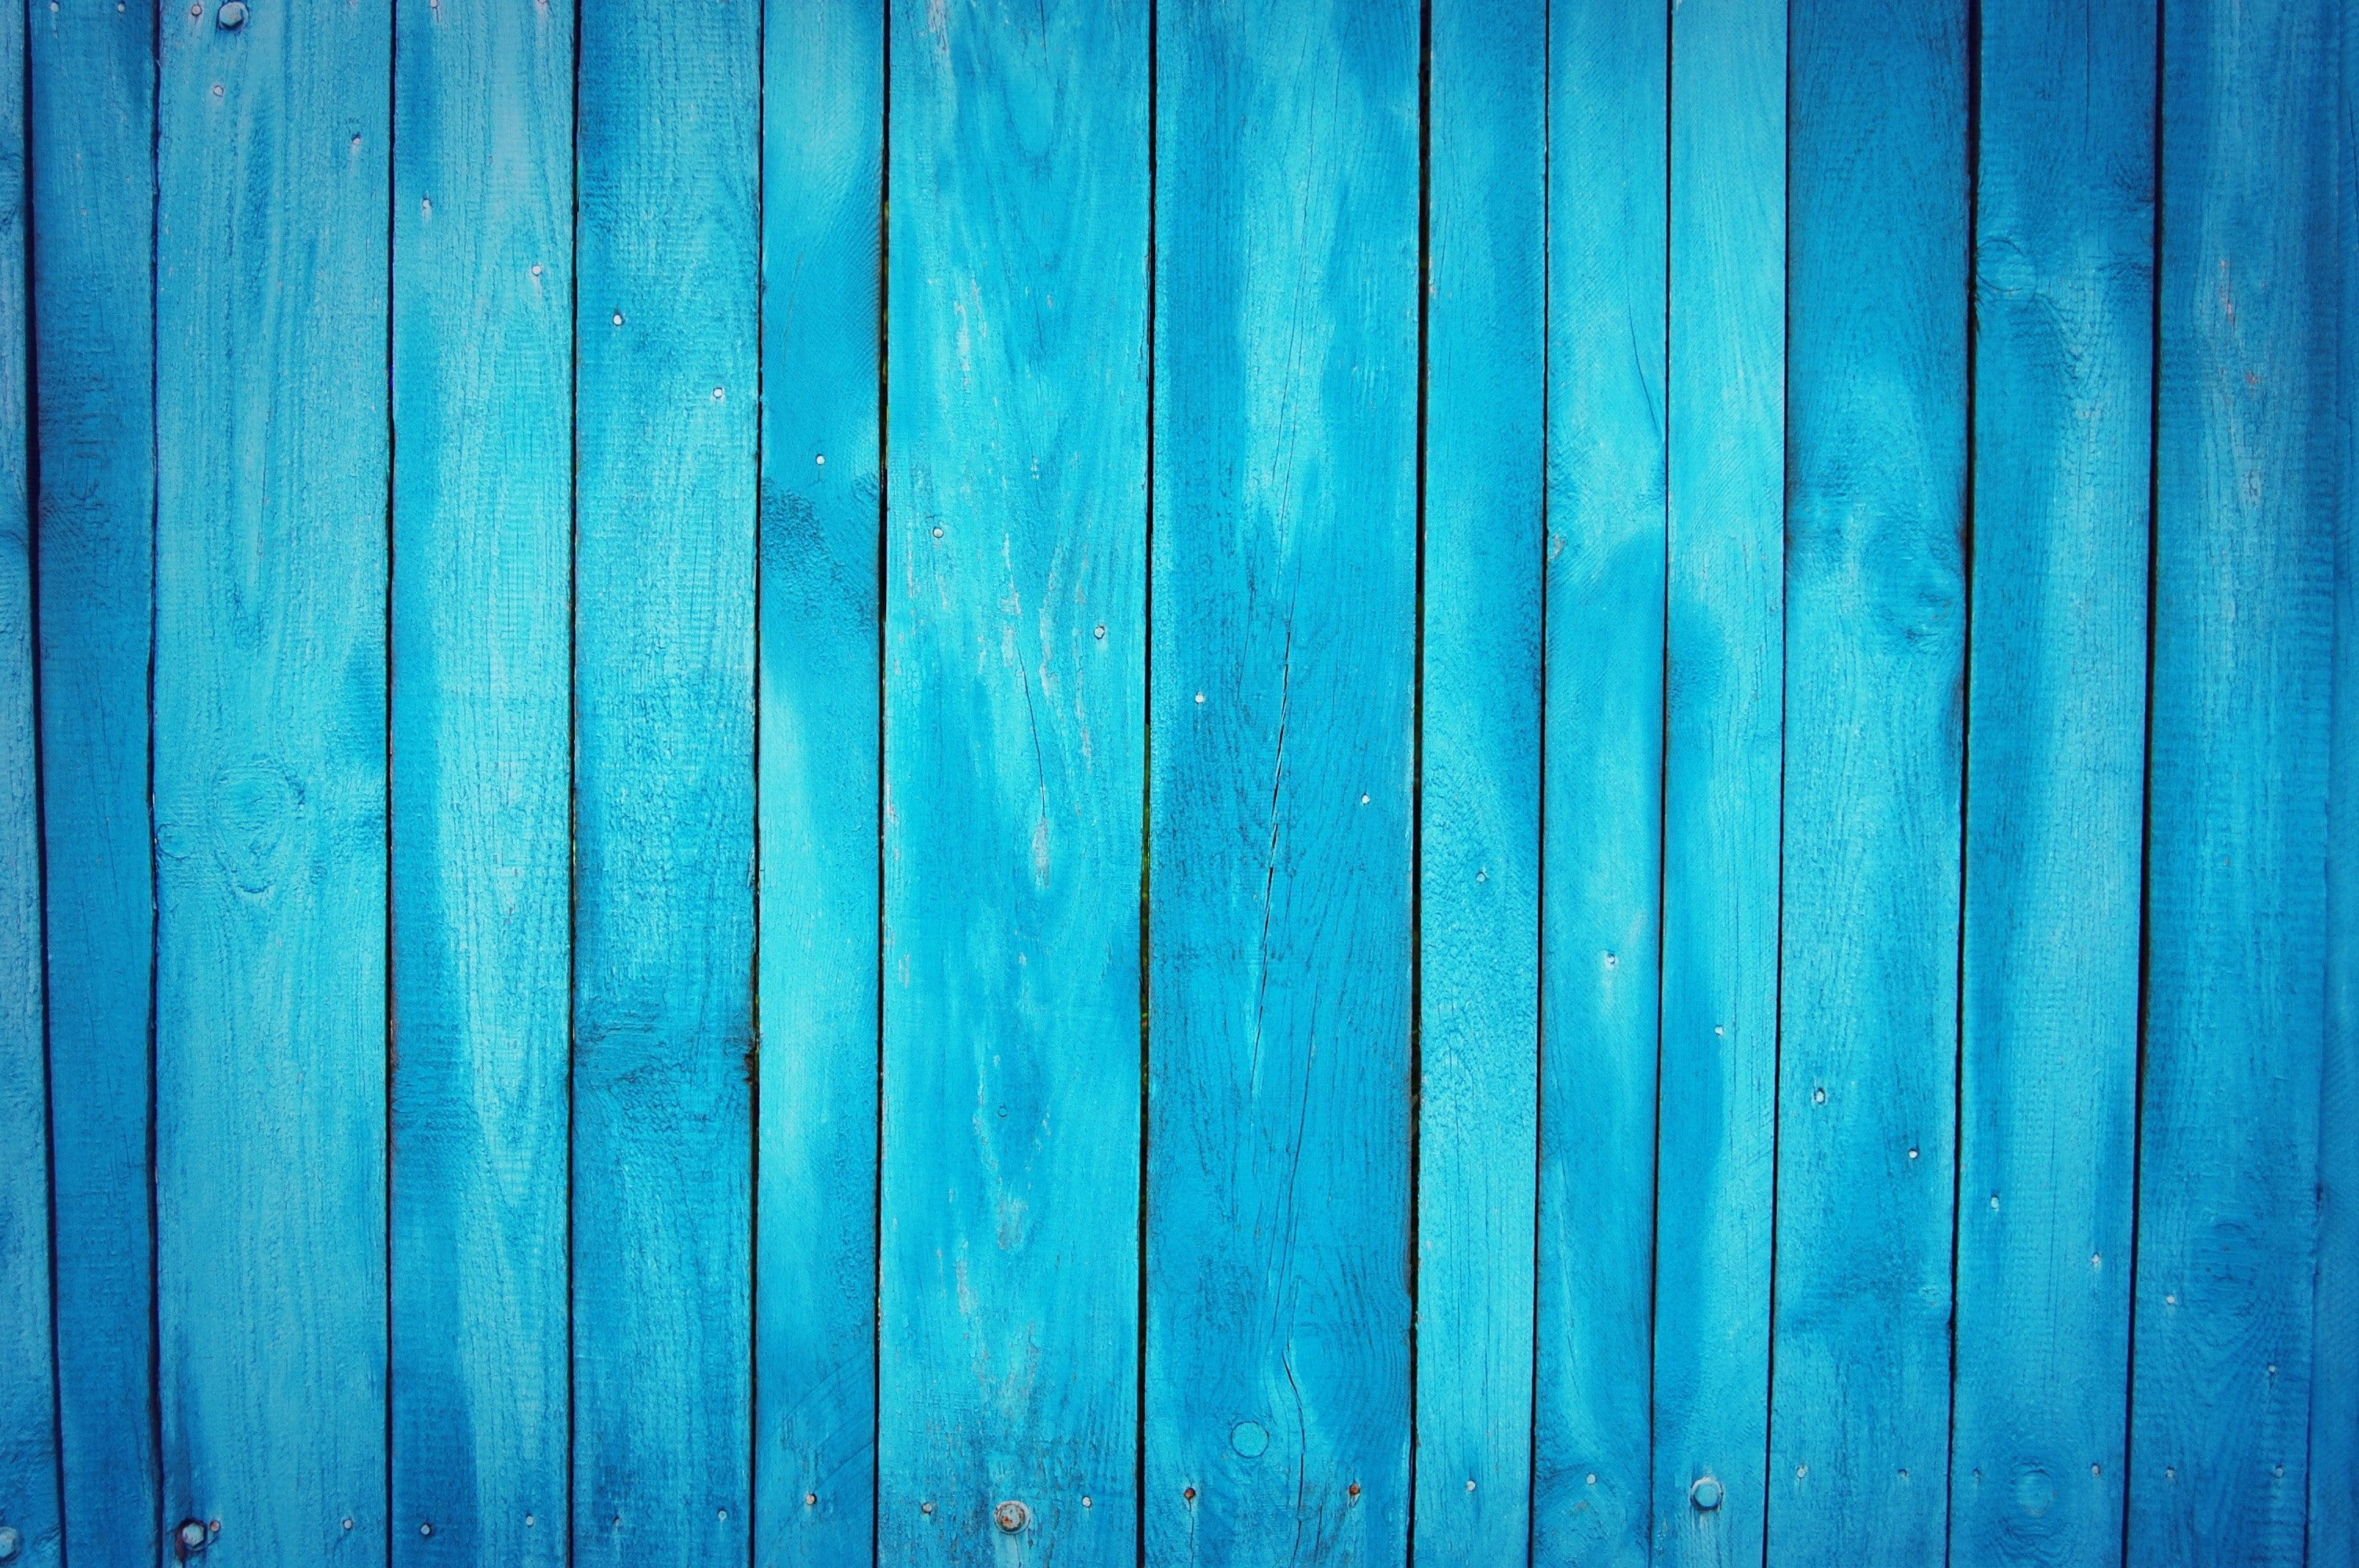 wood, blue, texture, wooden surface, backgrounds, wood - material